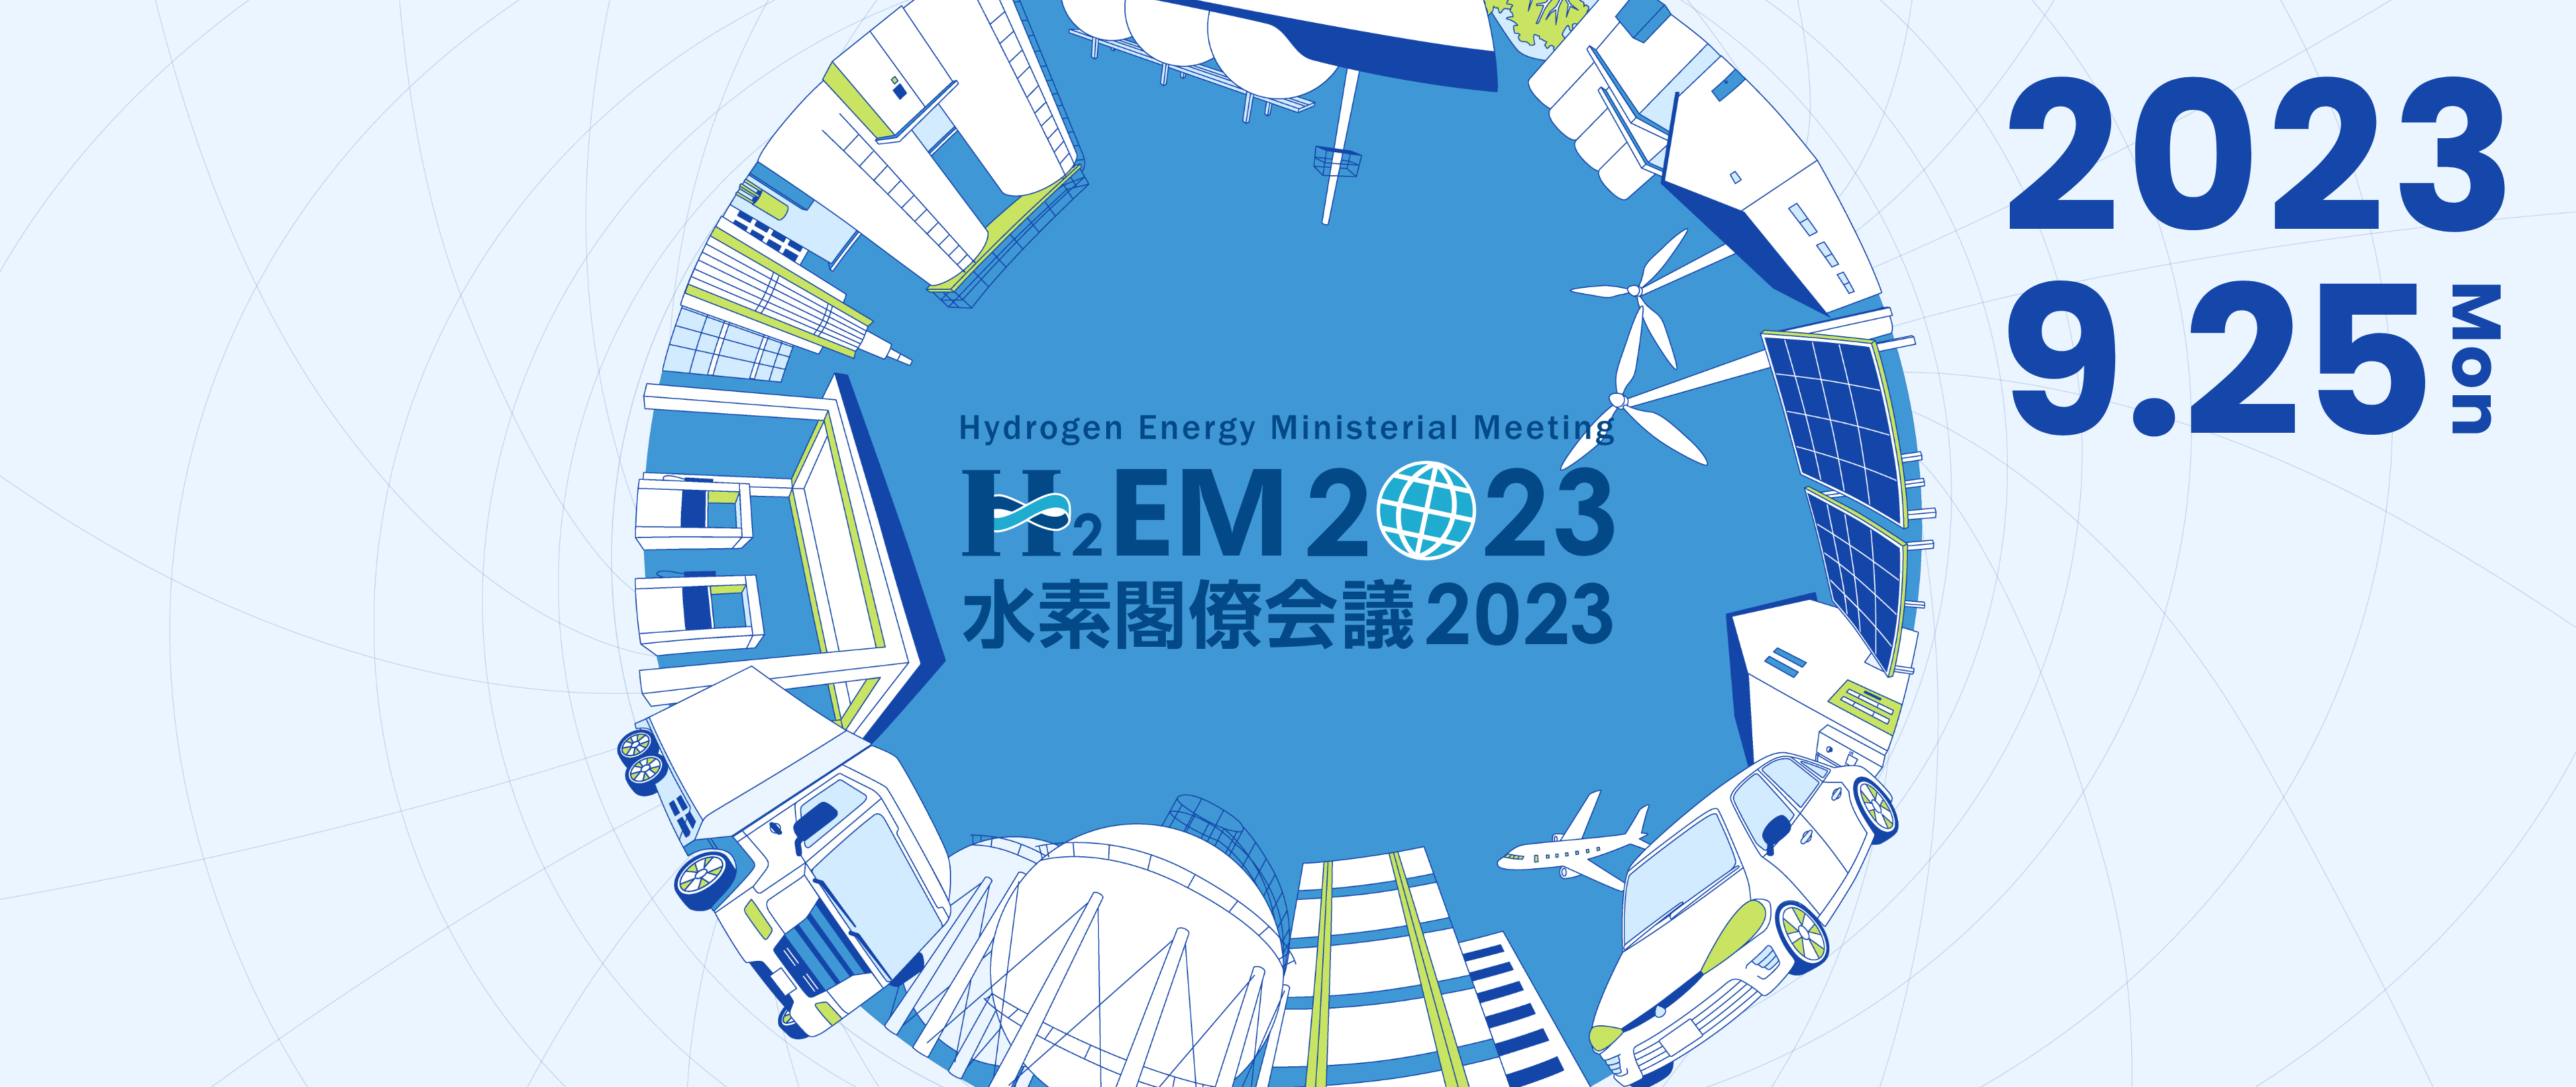 The Hydrogen Energy Ministerial Meeting 2023